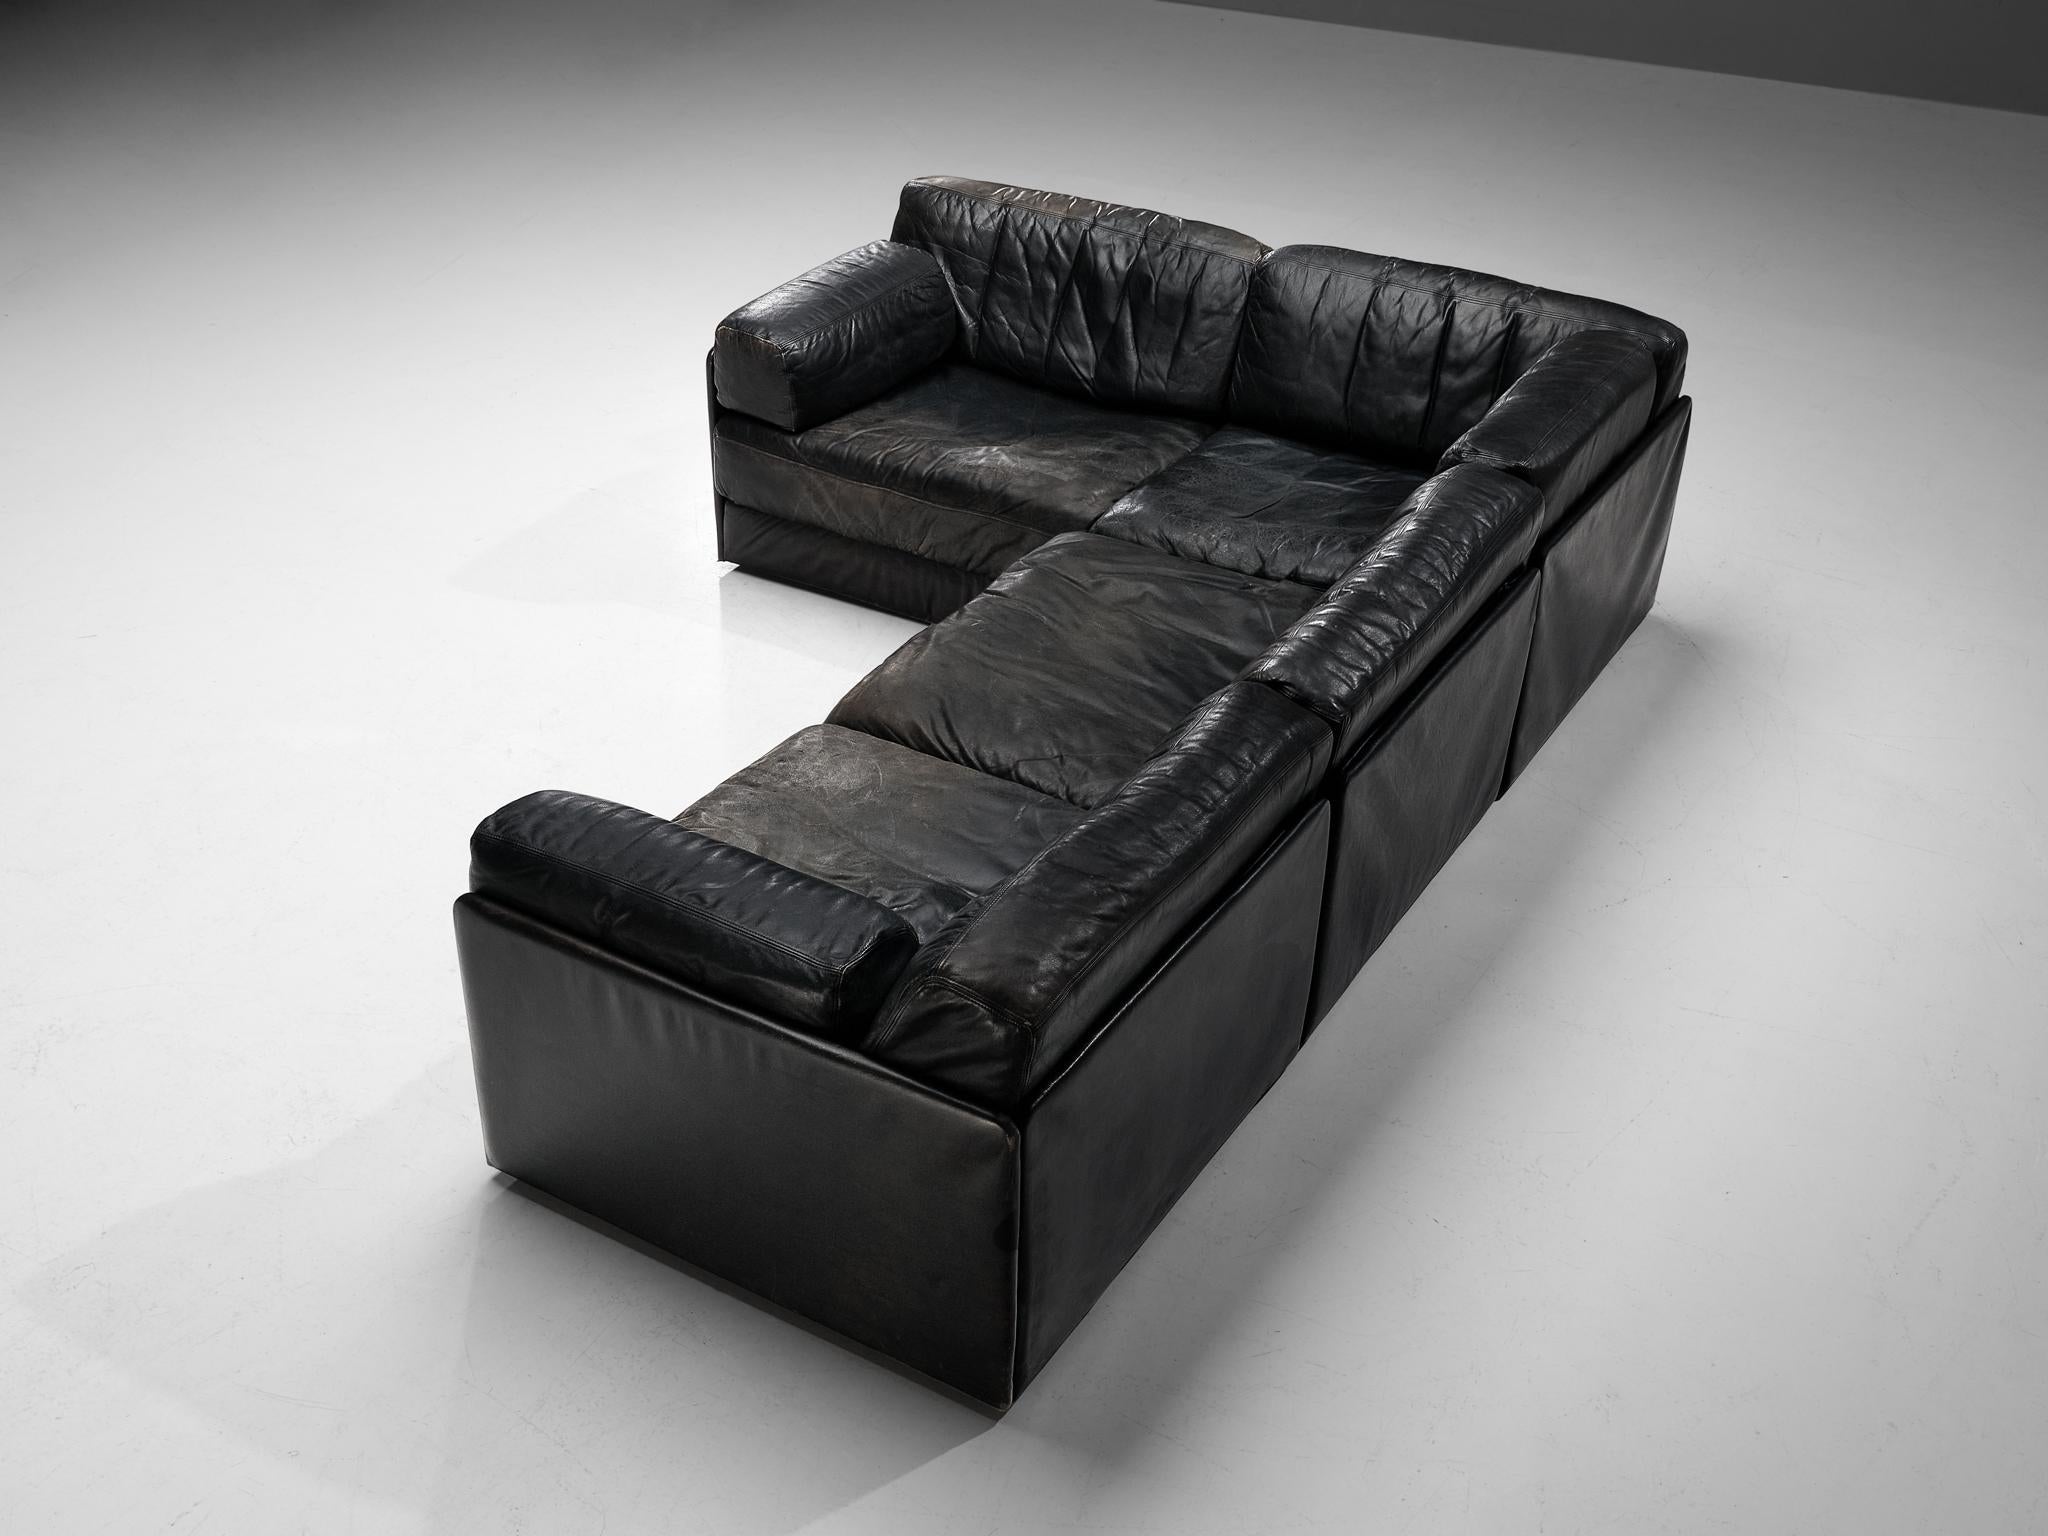 De Sede, modular sofa, model ‘DS-76’, leather, Switzerland, 1970s

This high-quality sectional sofa designed by De Sede in the 1970s contains one corner element, one regular element and two outer elements with two moveable cushions, making it